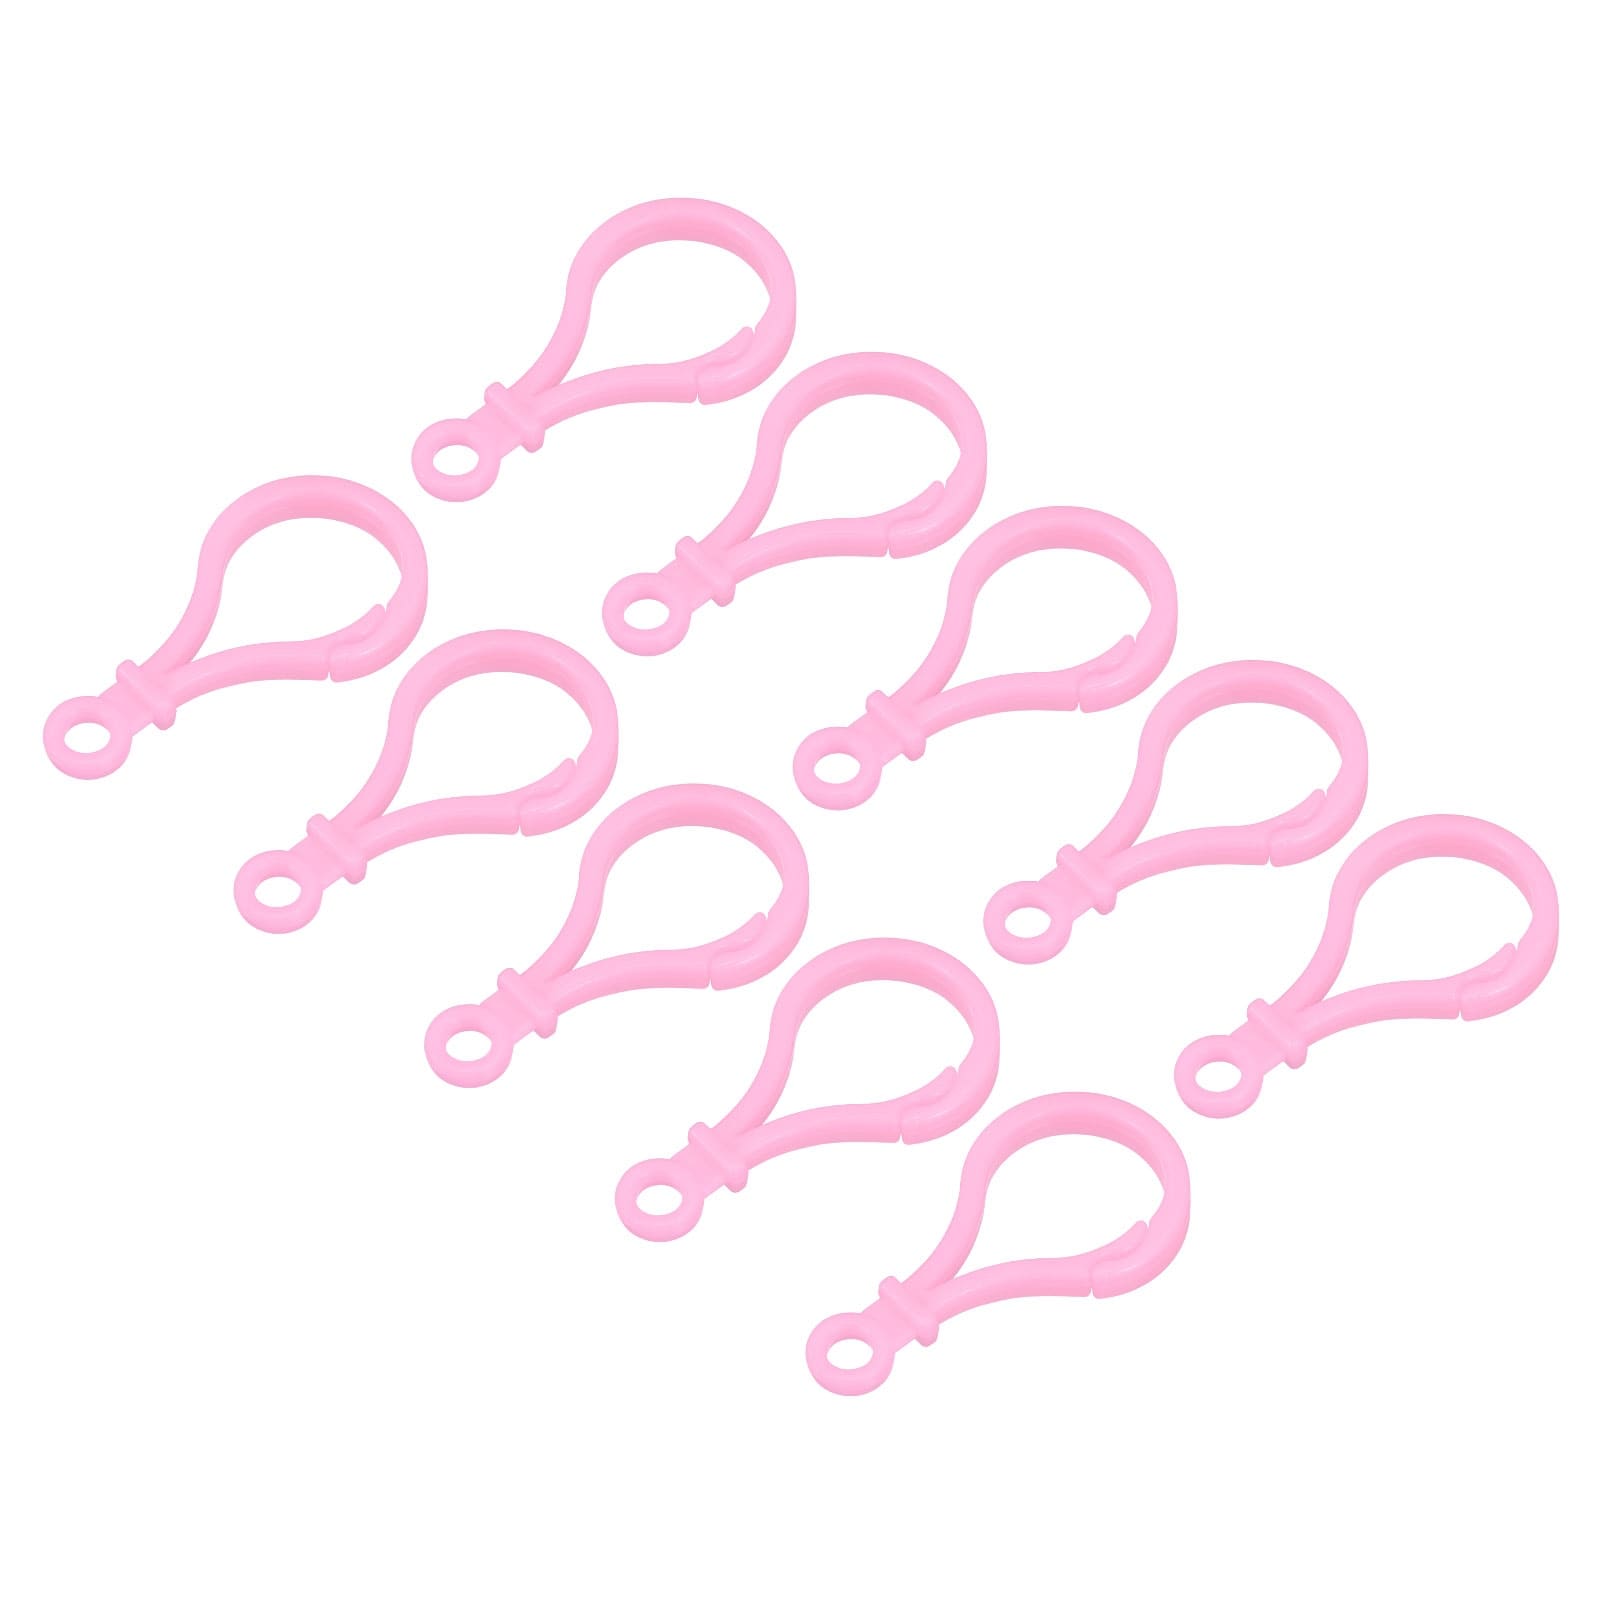 Plastic Lobster Clasps, Claw Snap Hooks for Keychains DIY Pink, 100Pcs -  Pink - 50mm - Bed Bath & Beyond - 36886180